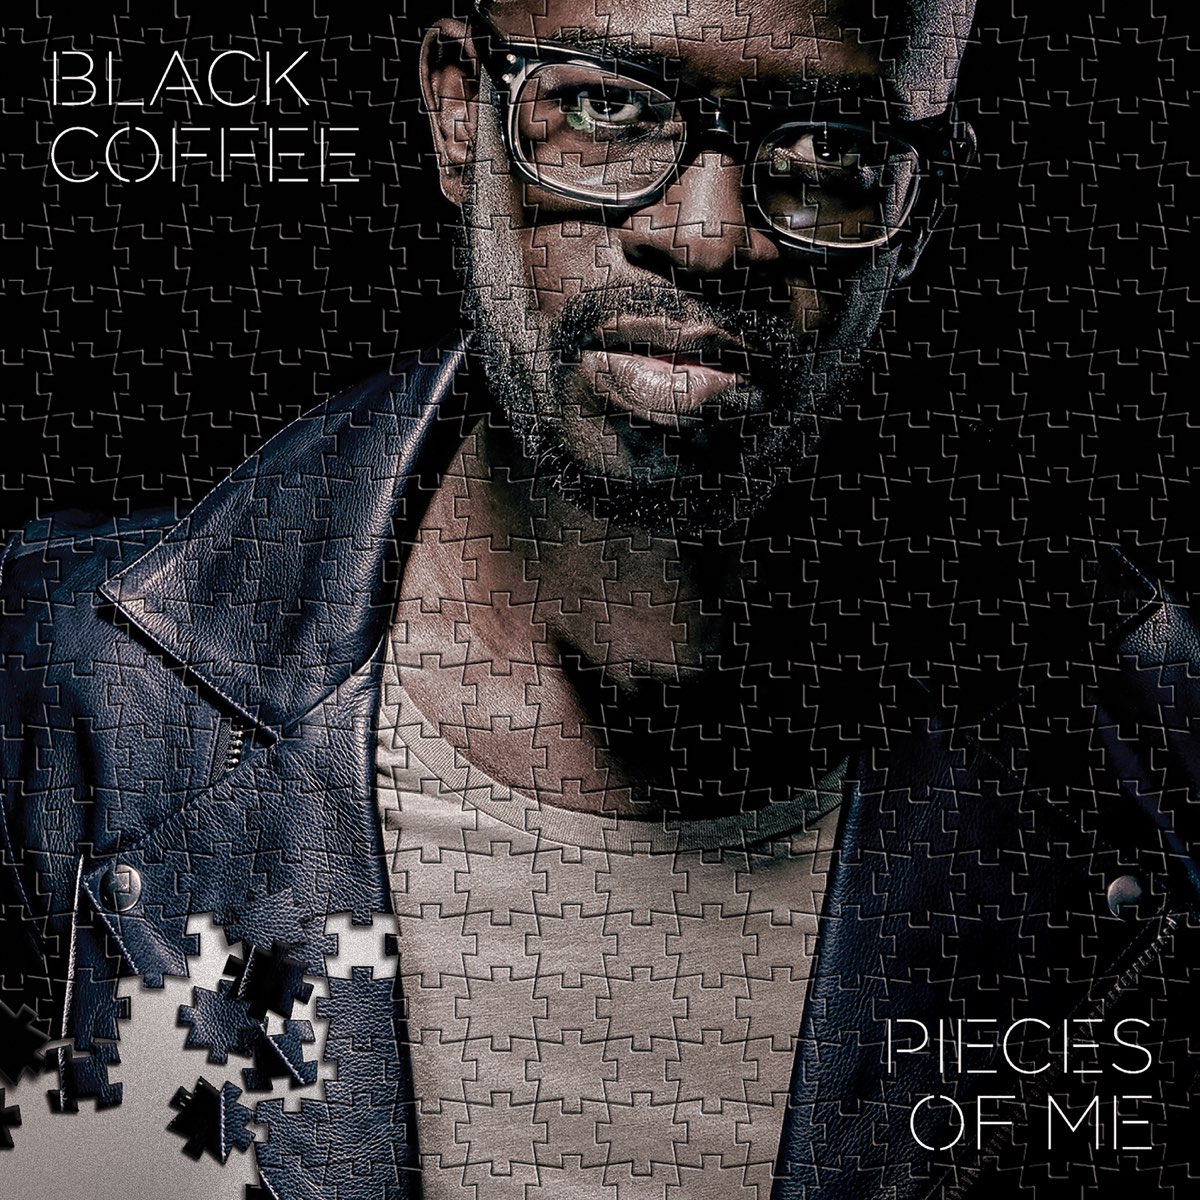 Pieces Of Me - Album by Black Coffee